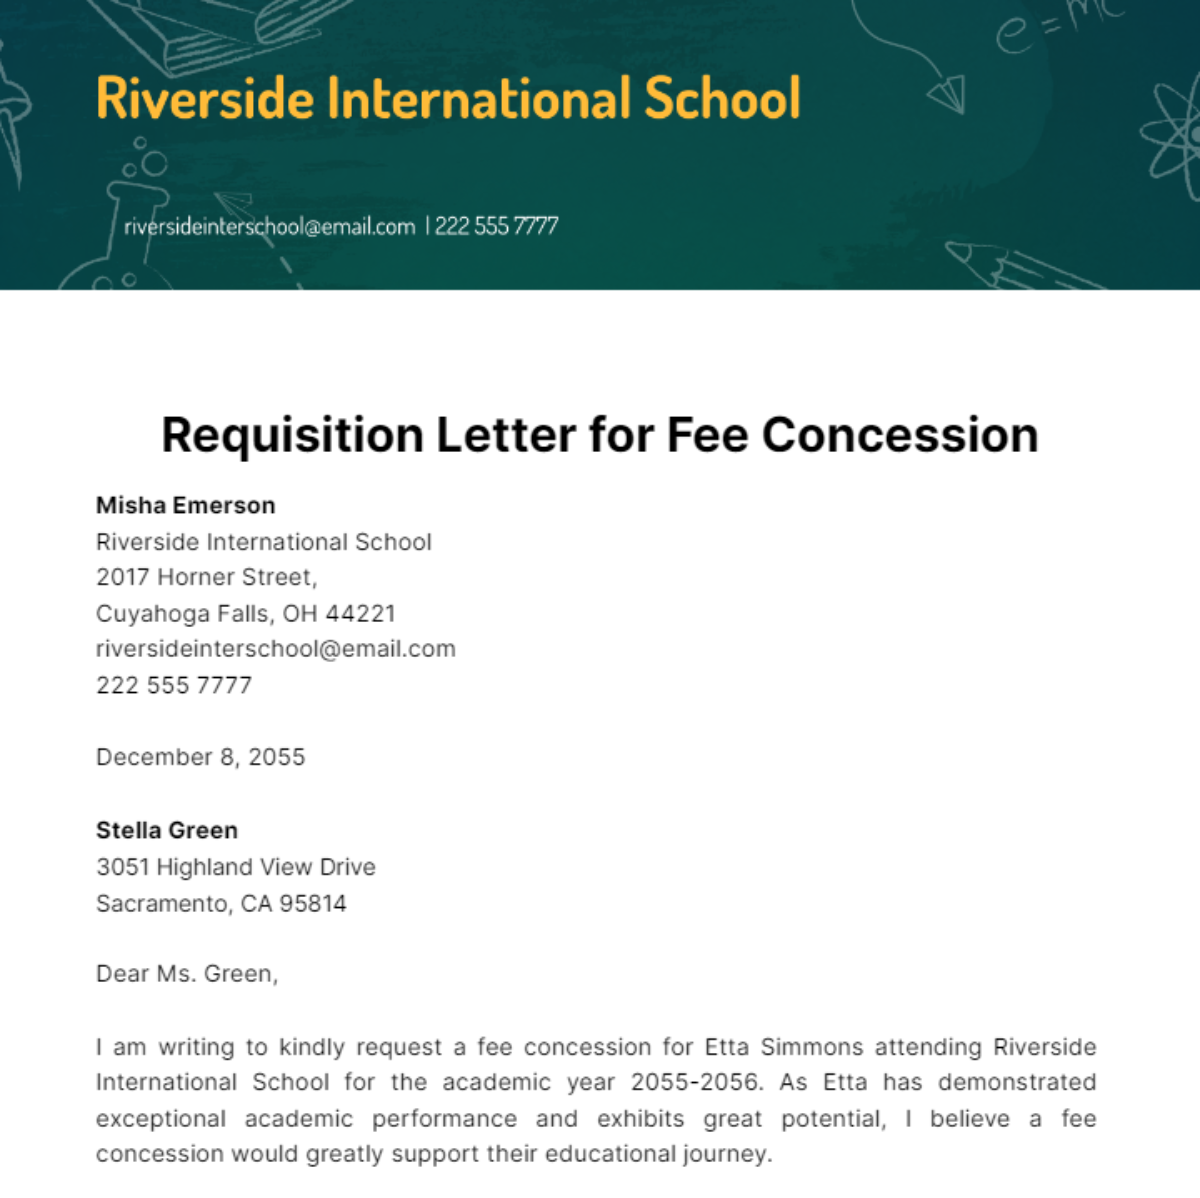 Requisition Letter for Fee Concession Template